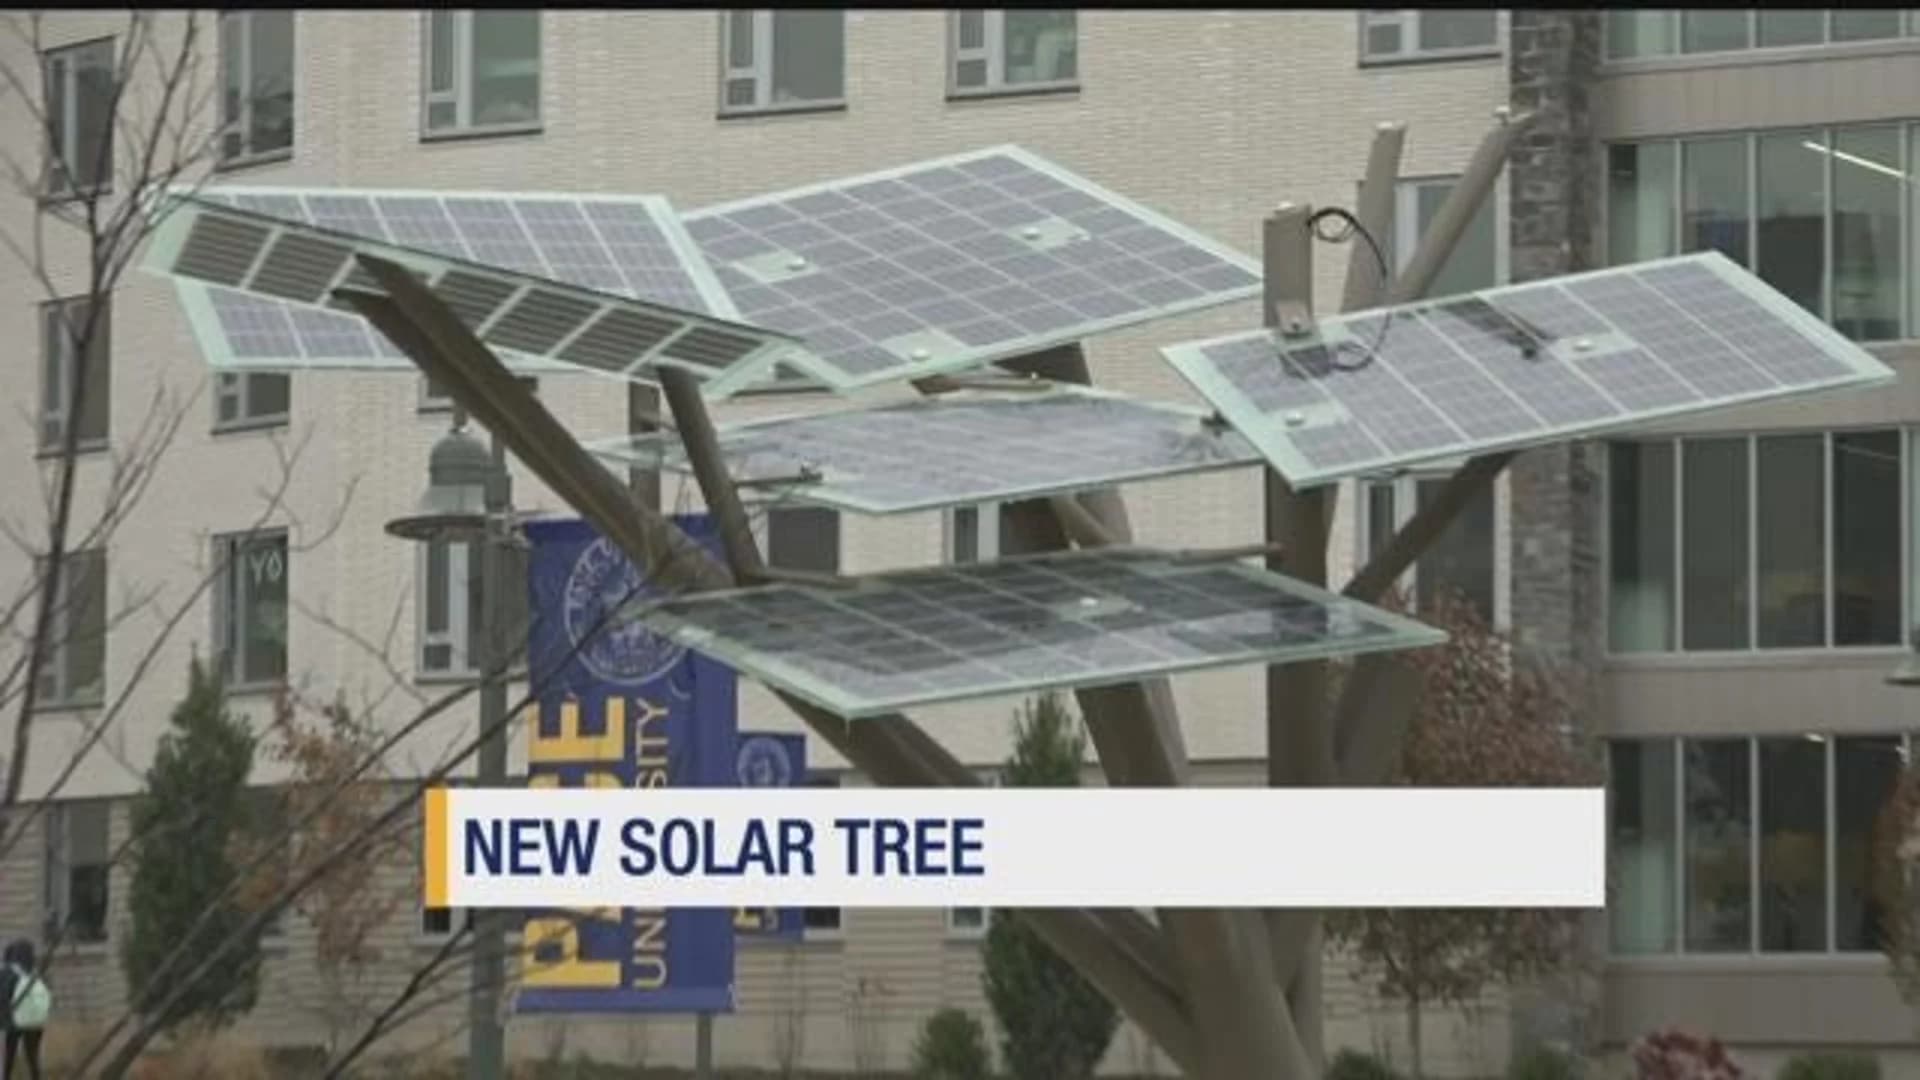 Solar tree at Pace University offers shade, Wi-Fi and more